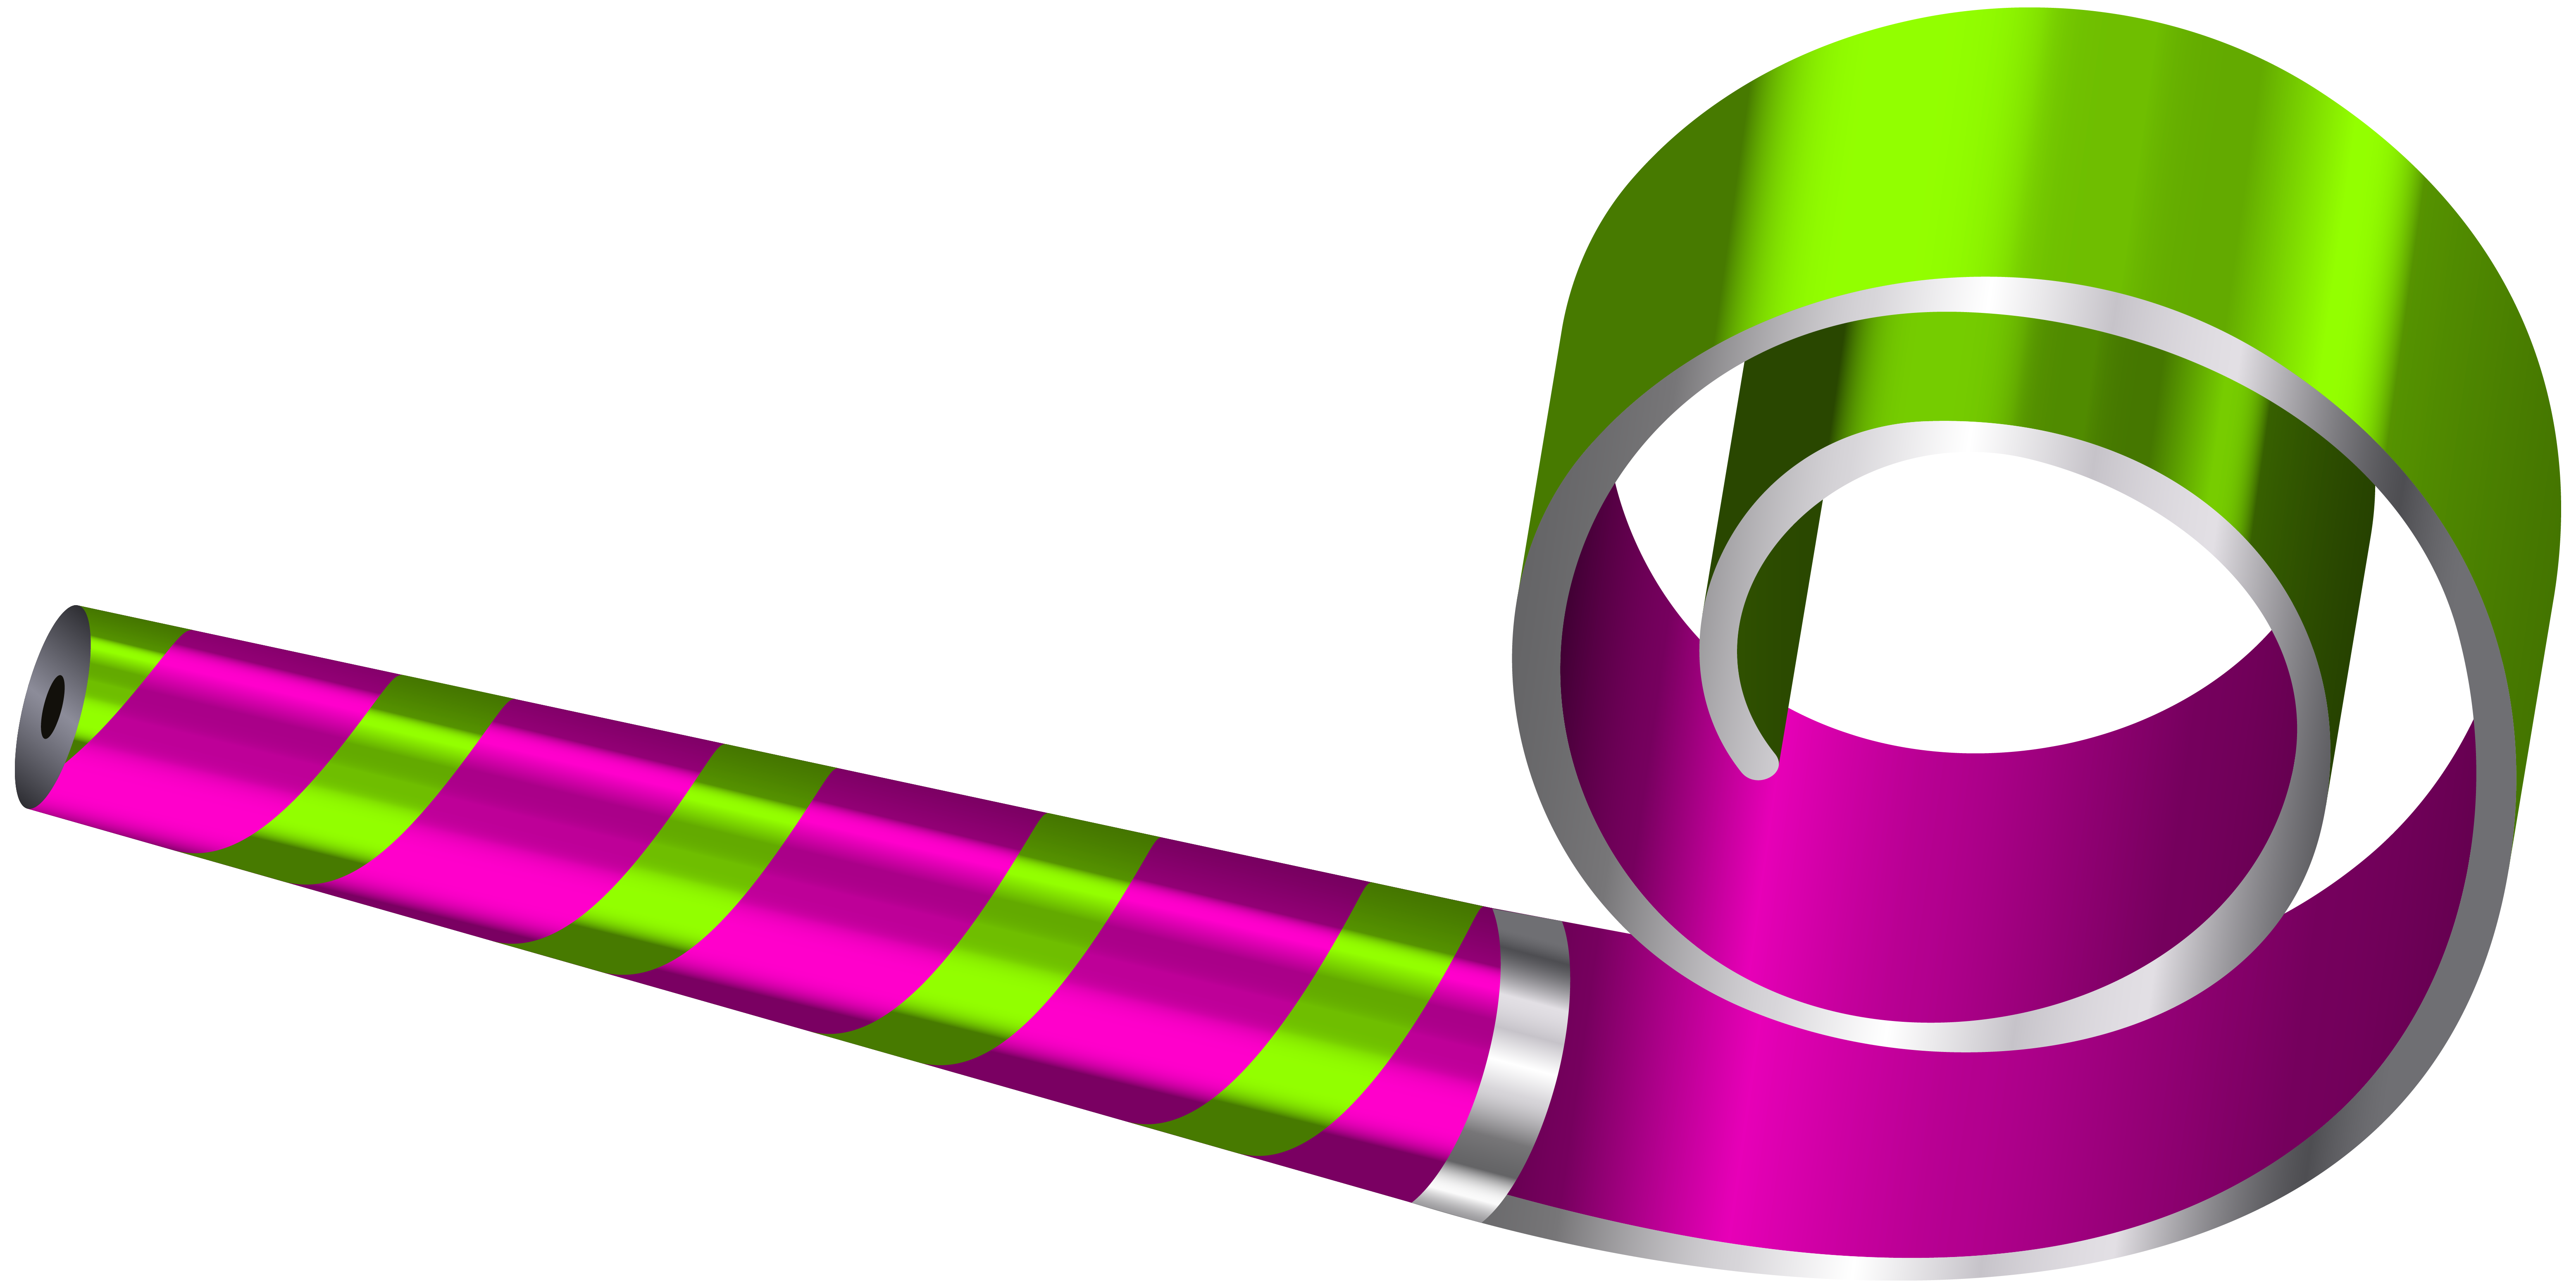 horn clipart party whistle